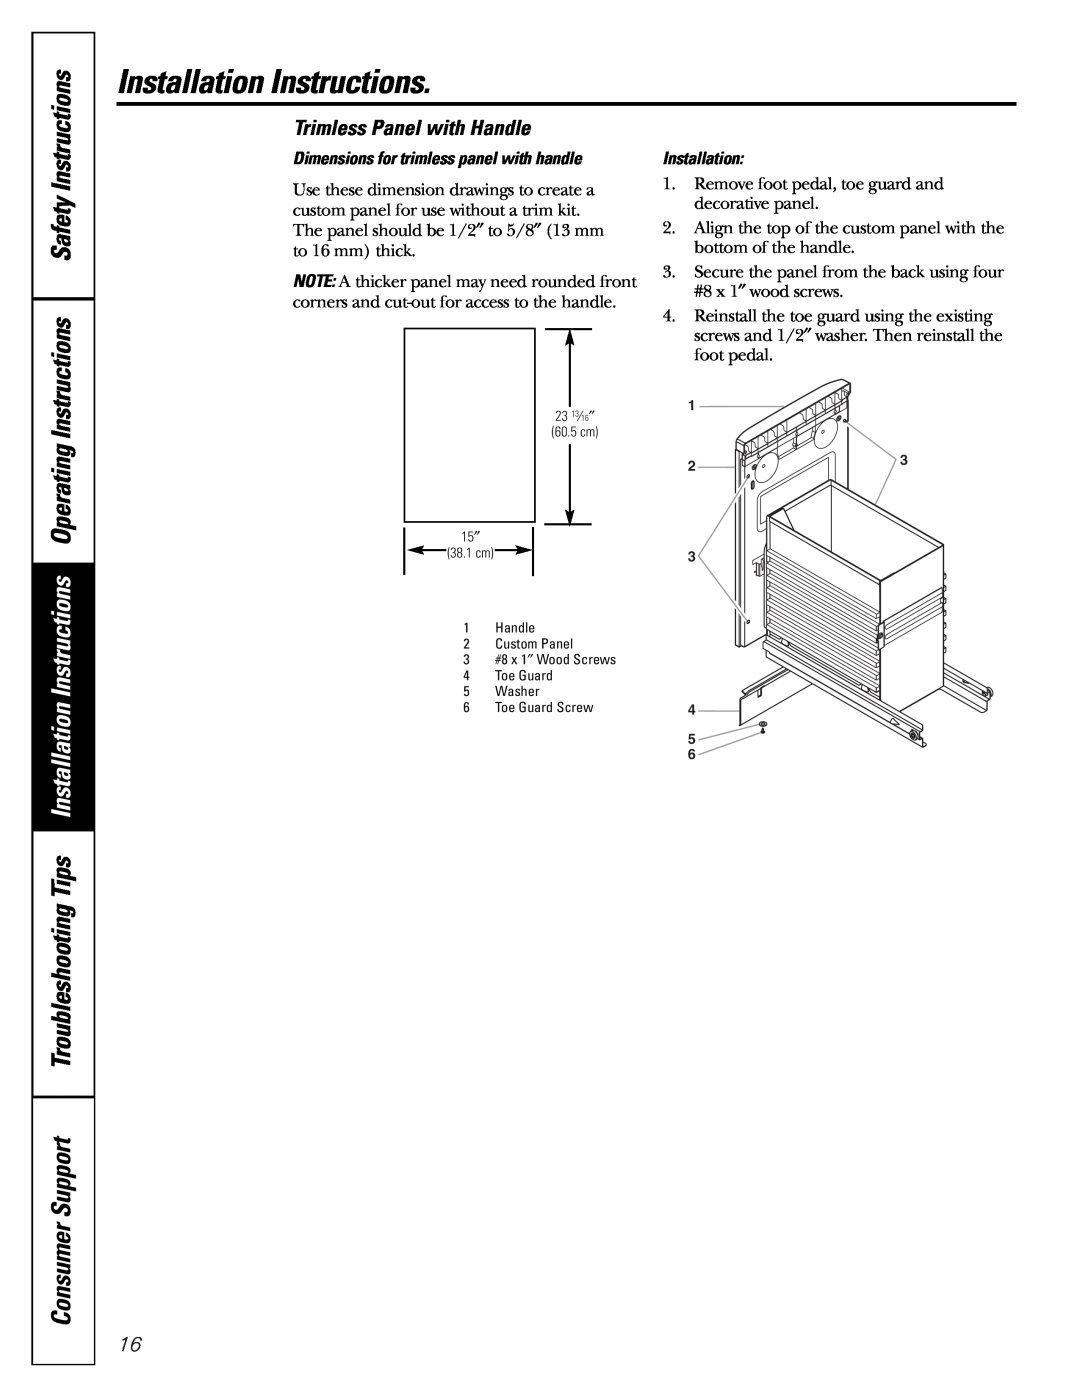 GE GCG1520 Trimless Panel with Handle, Installation Instructions, Dimensions for trimless panel with handle 